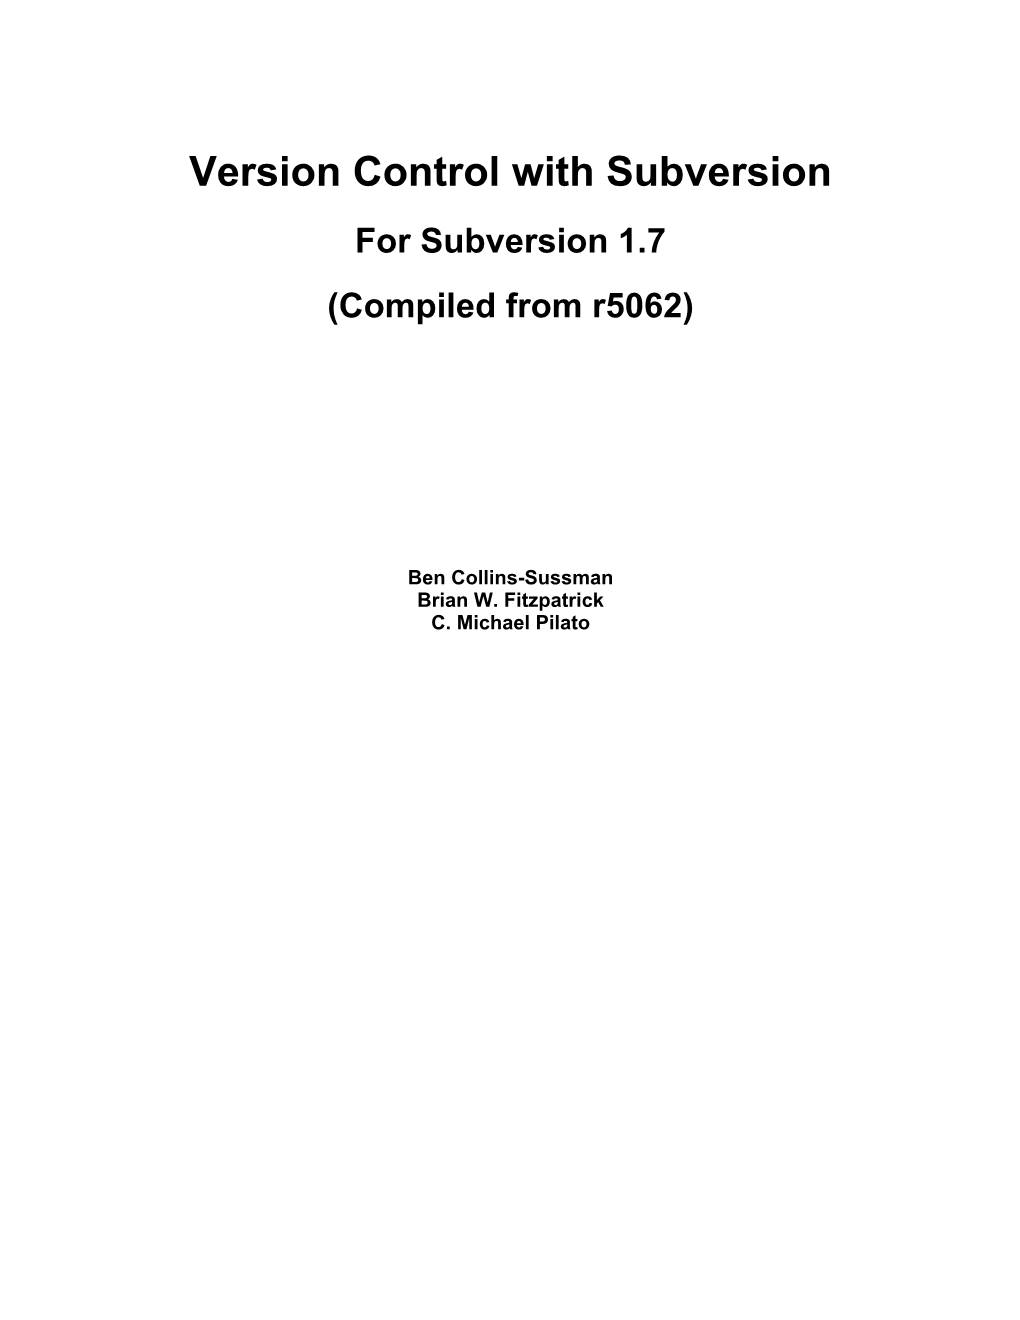 Version Control with Subversion for Subversion 1.7 (Compiled from R5062)